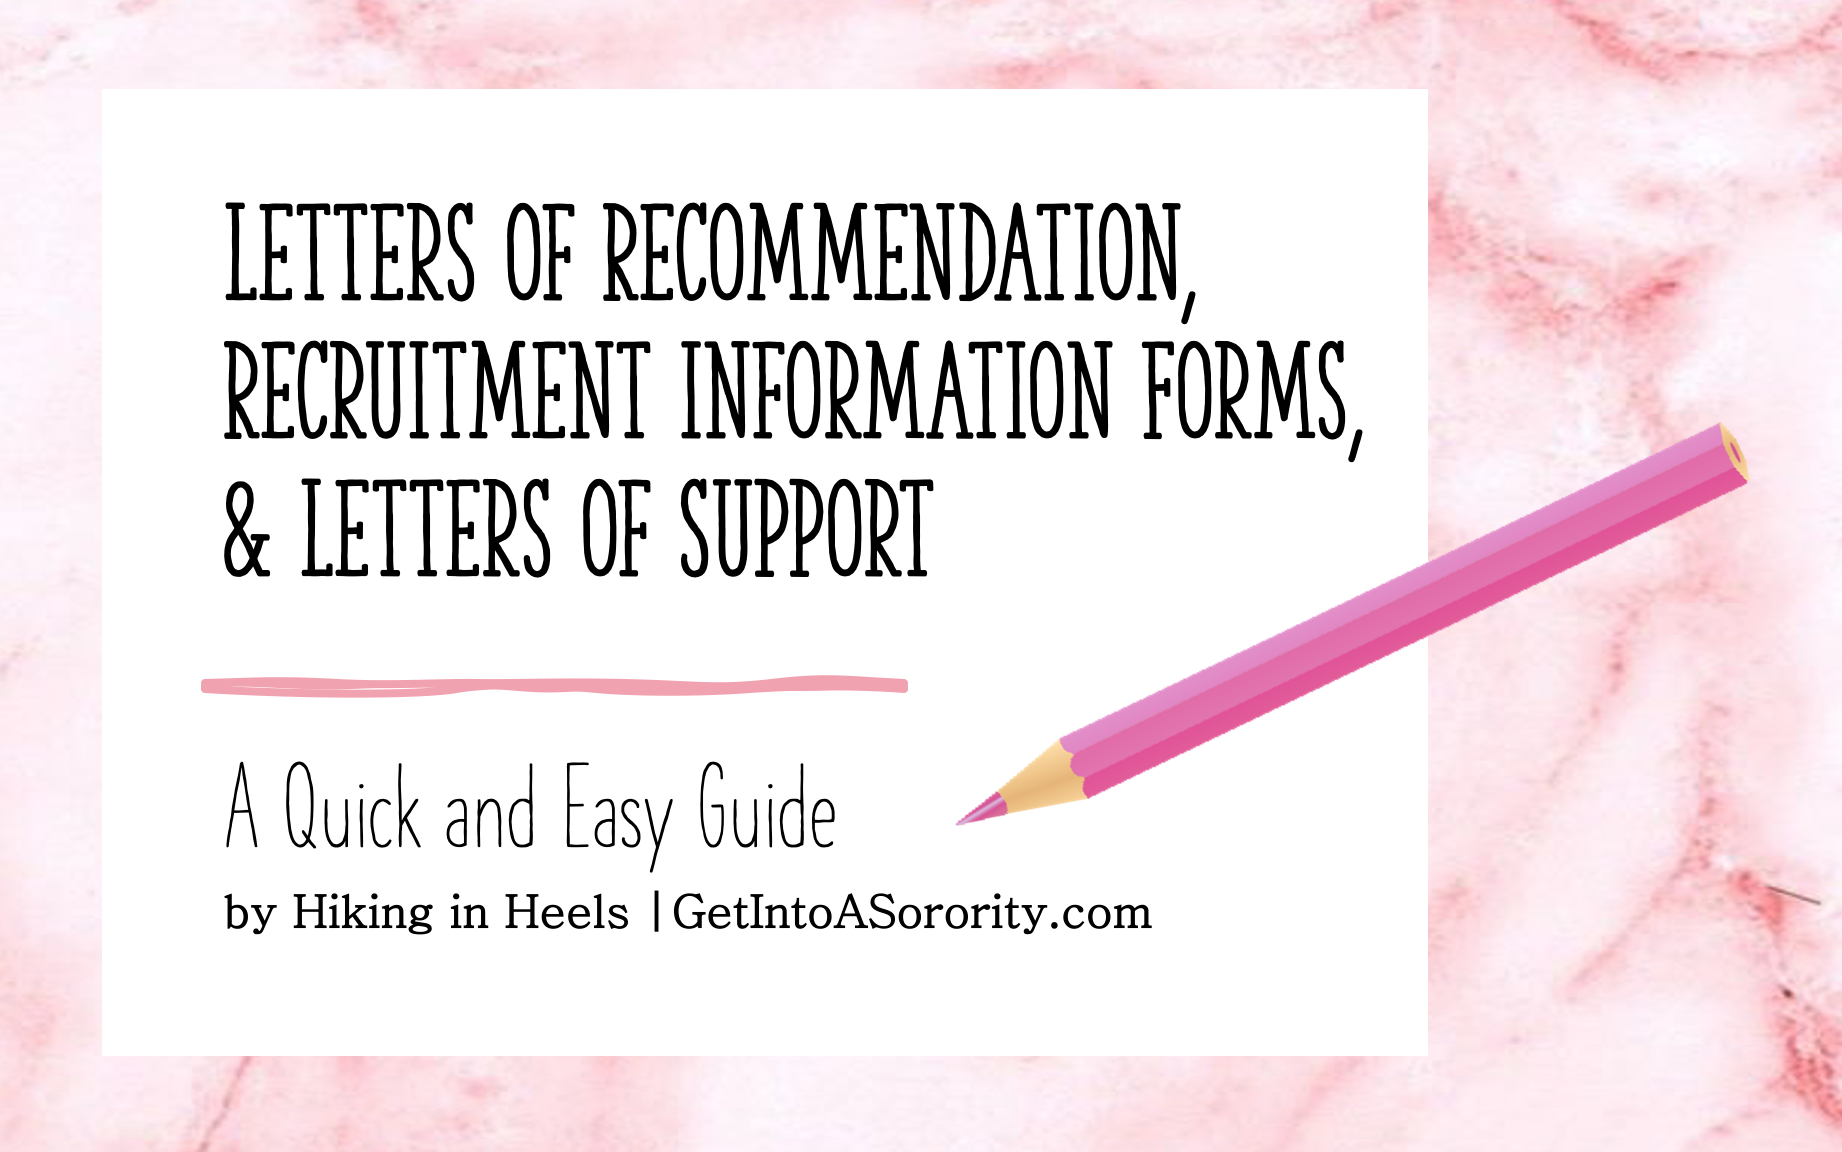 What are Sorority Letters of Recommendation / Letters of Support